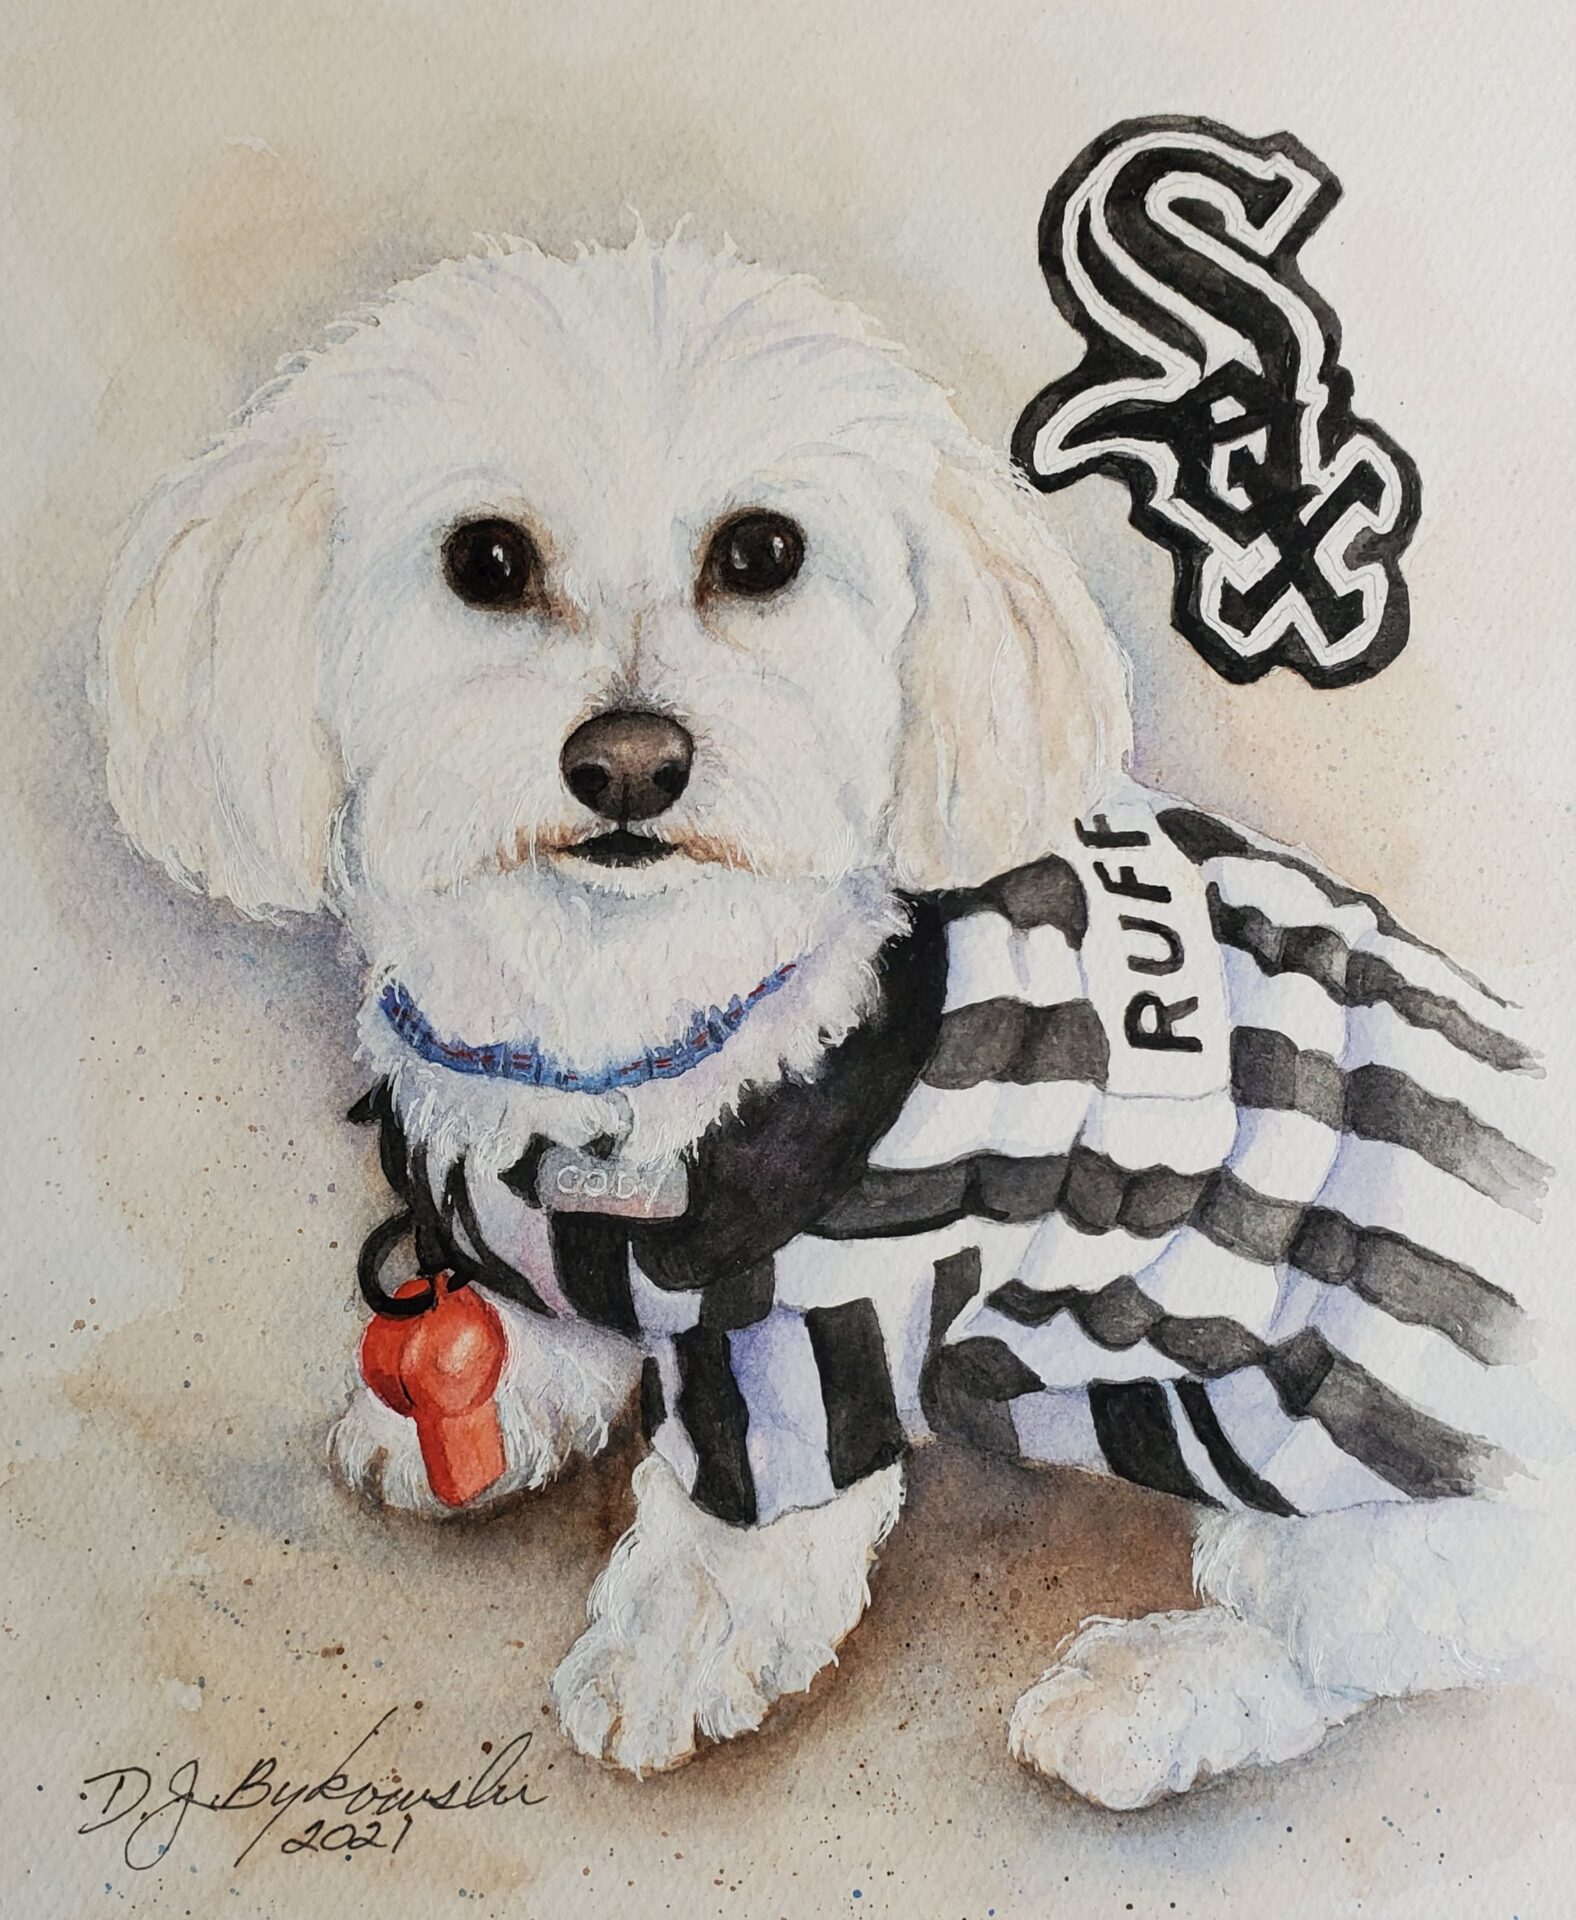 Painting art of a dog wearing a black white stripes shirt